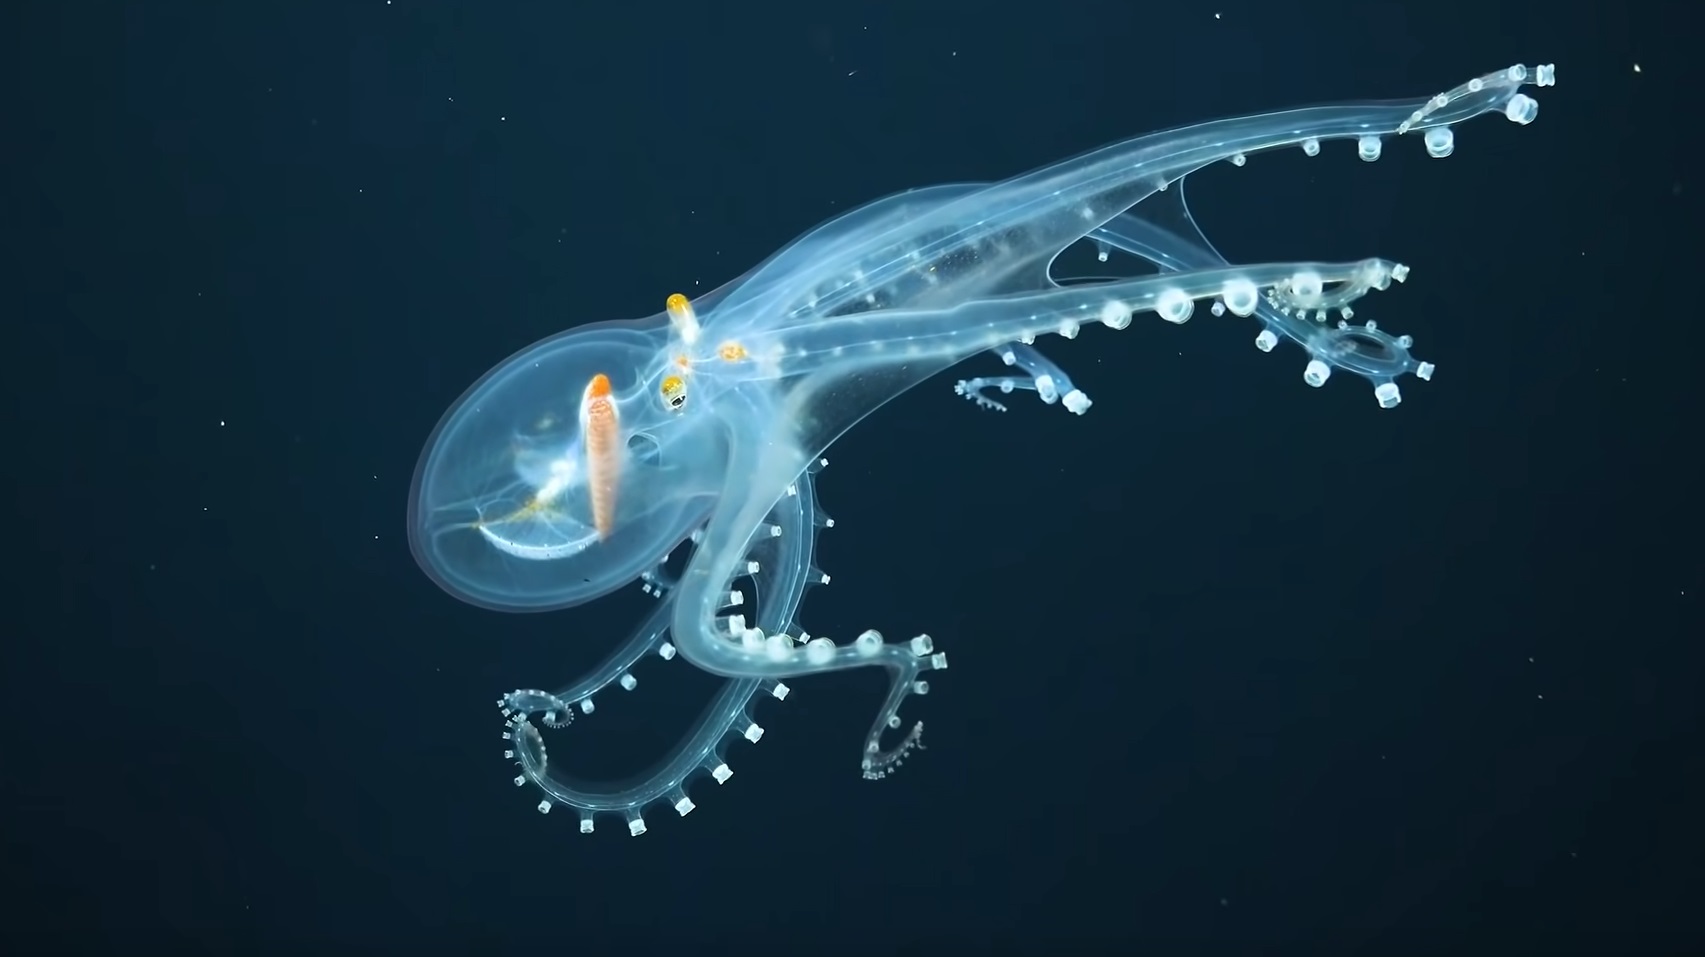 The Glass Octopus